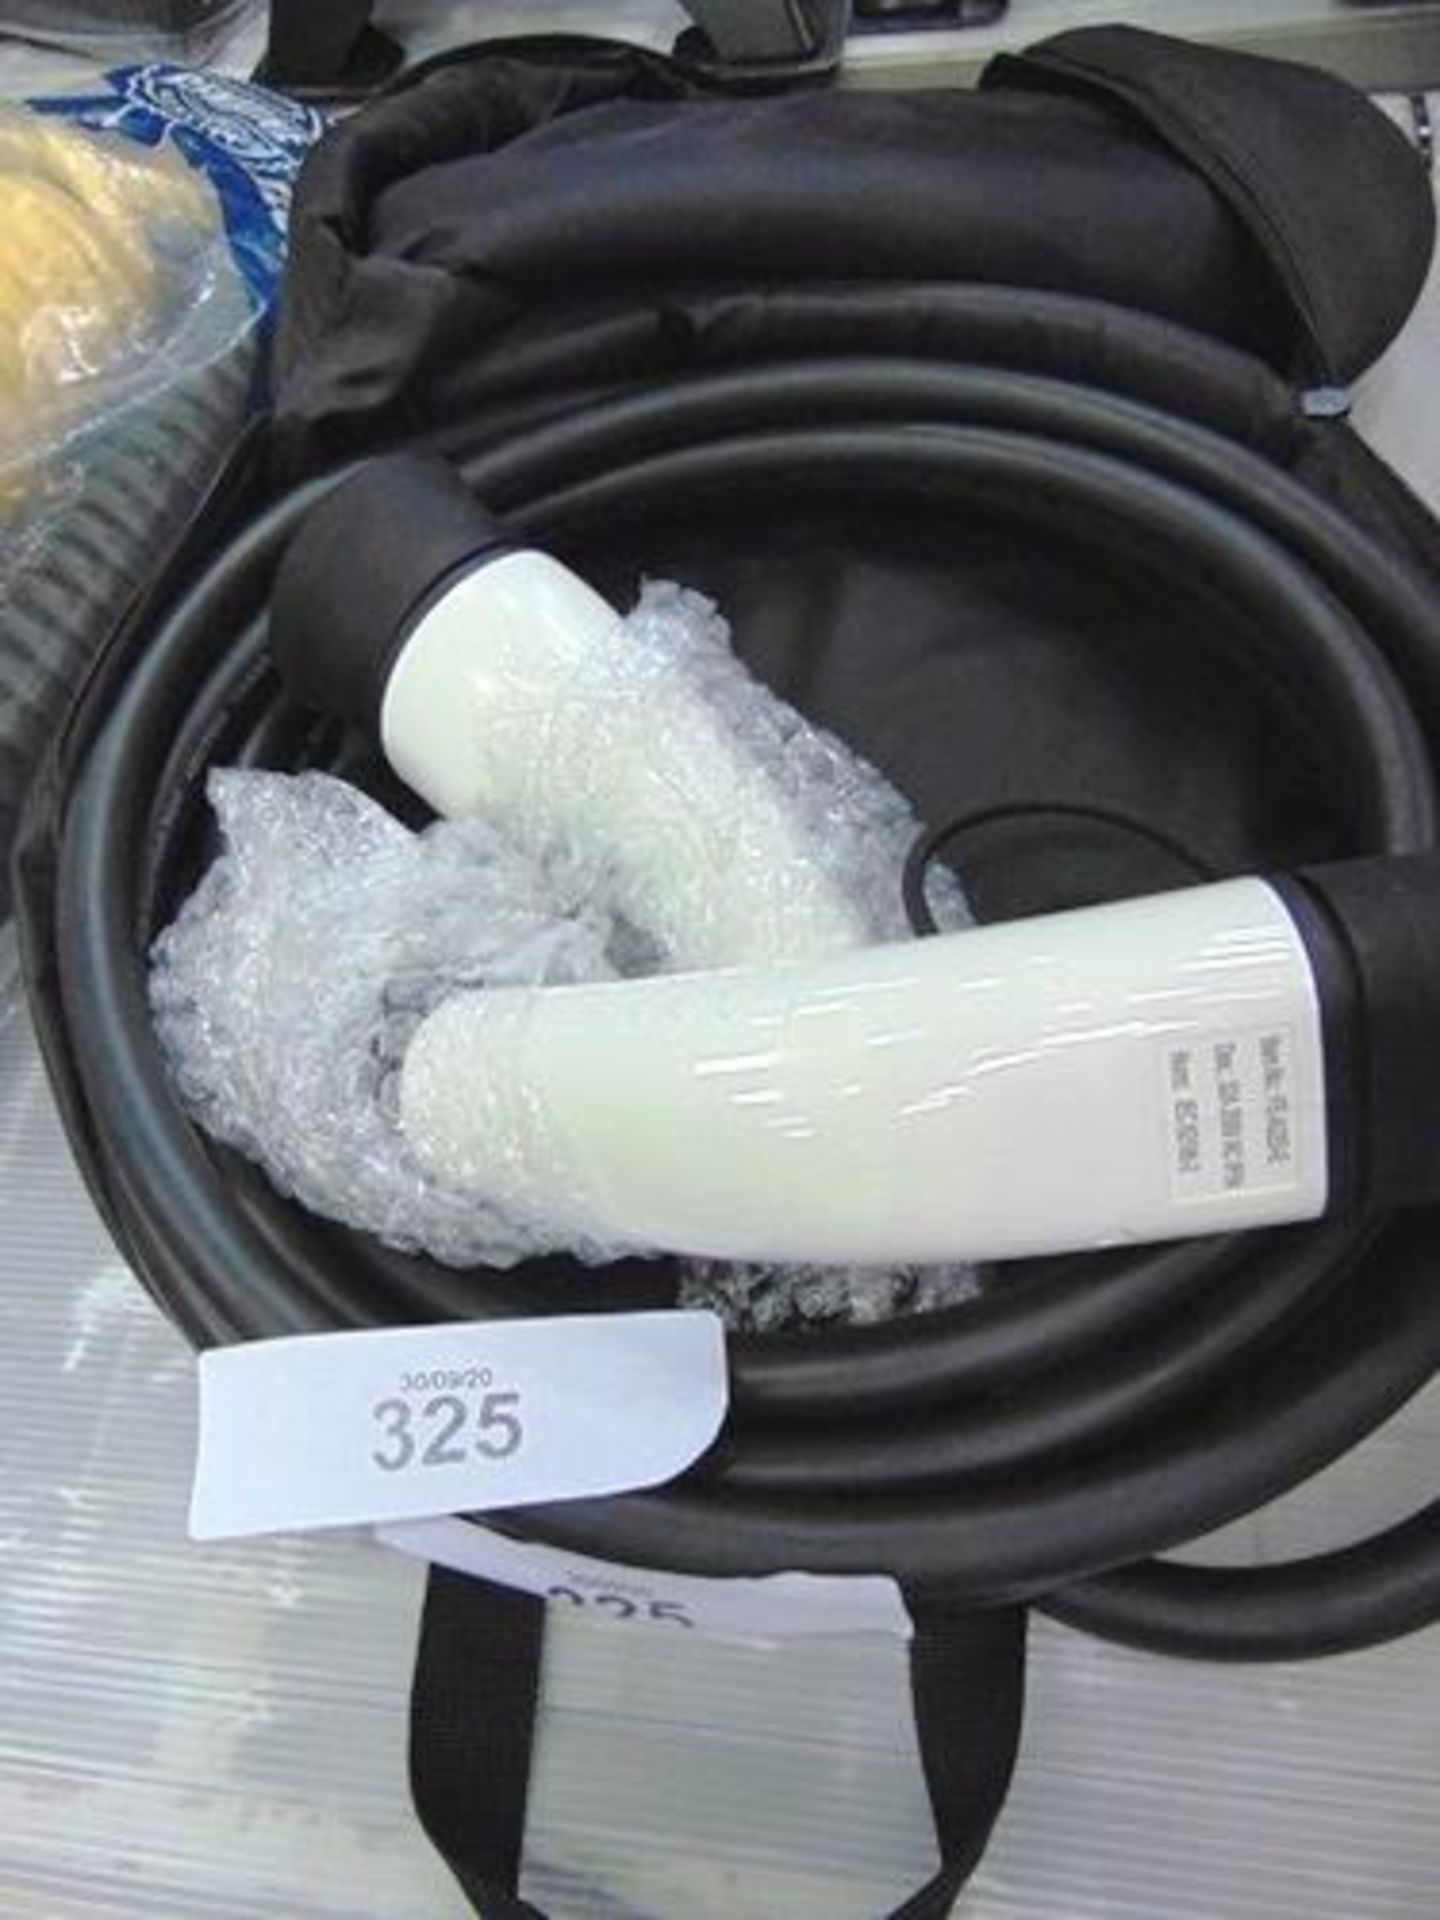 FSR electric vehicle charging cable, P.N. FE-A32D-E, 32 amp, 250V - New (GS9) - Image 3 of 4